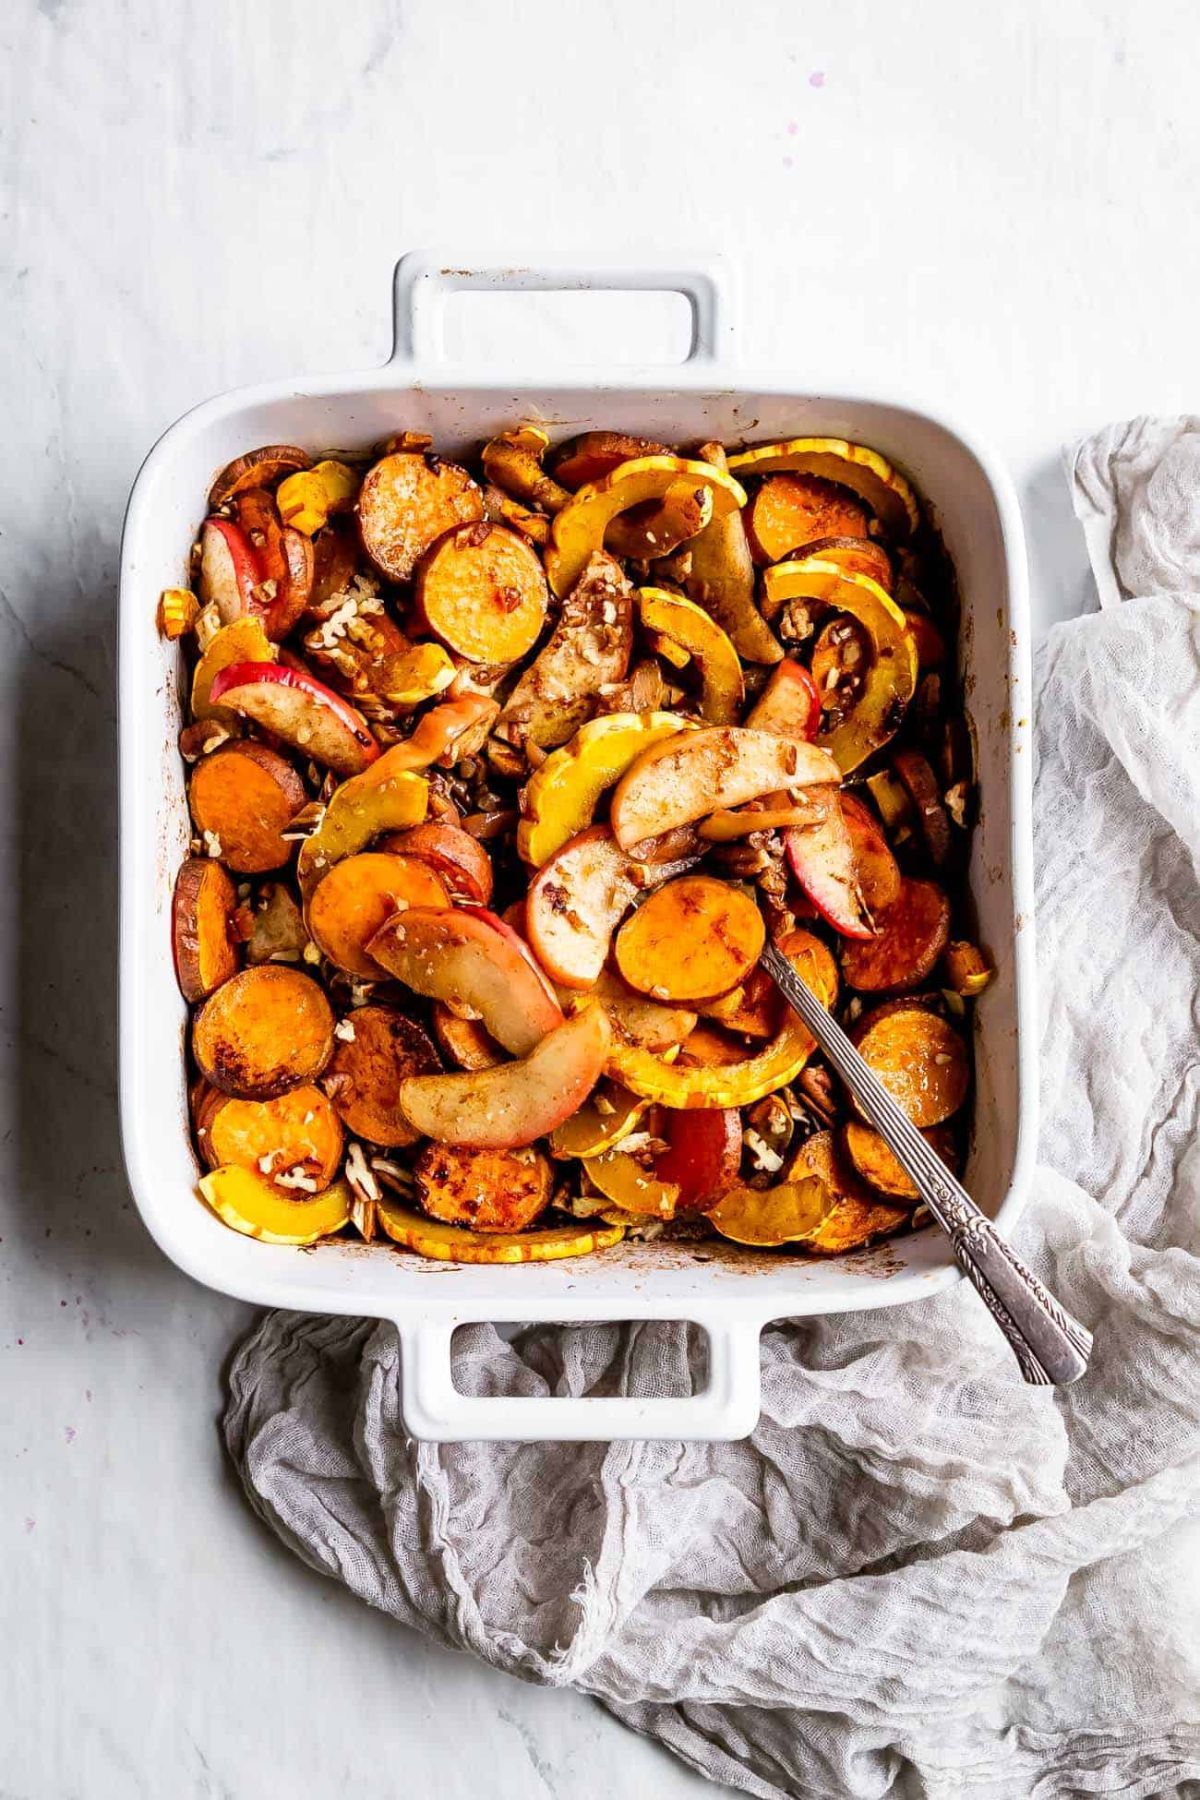 a square oven dish with slices of baked squash, sweet potato and apple in it. A silver spoon is sticking out of the dish